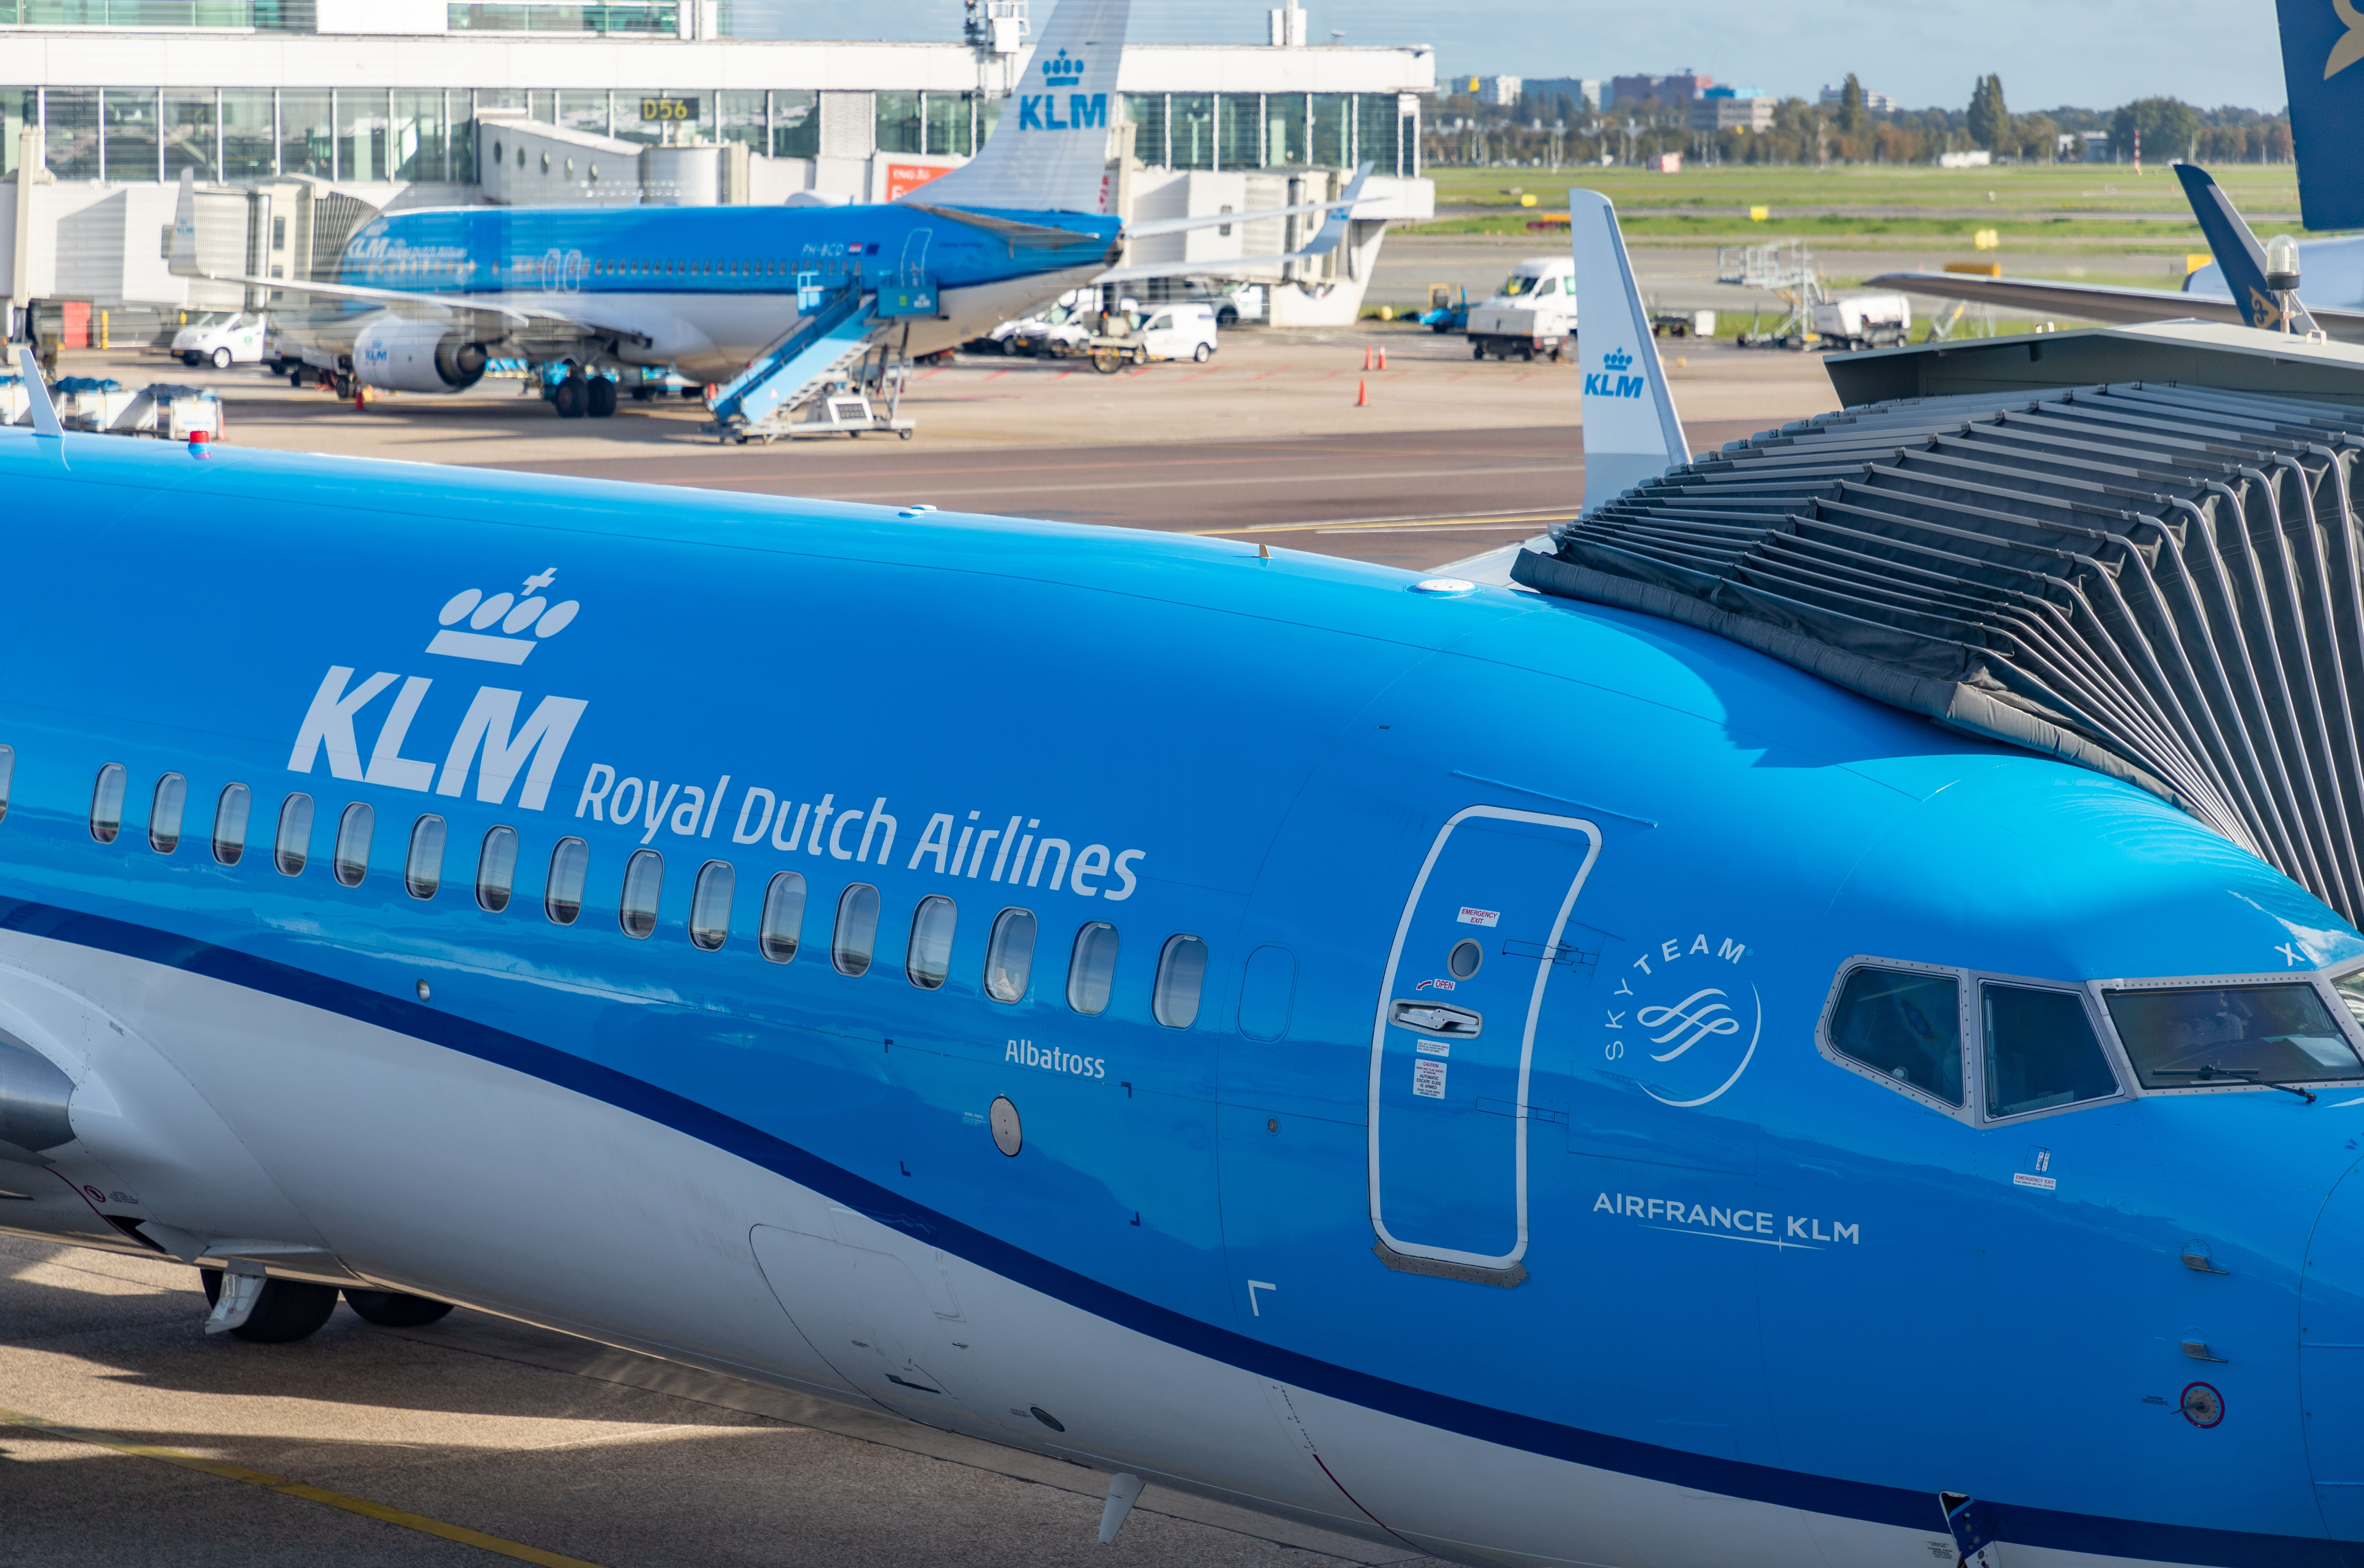 A closeup of a KLM aircraft parked at a gate at Amsterdam Airport Schiphol.